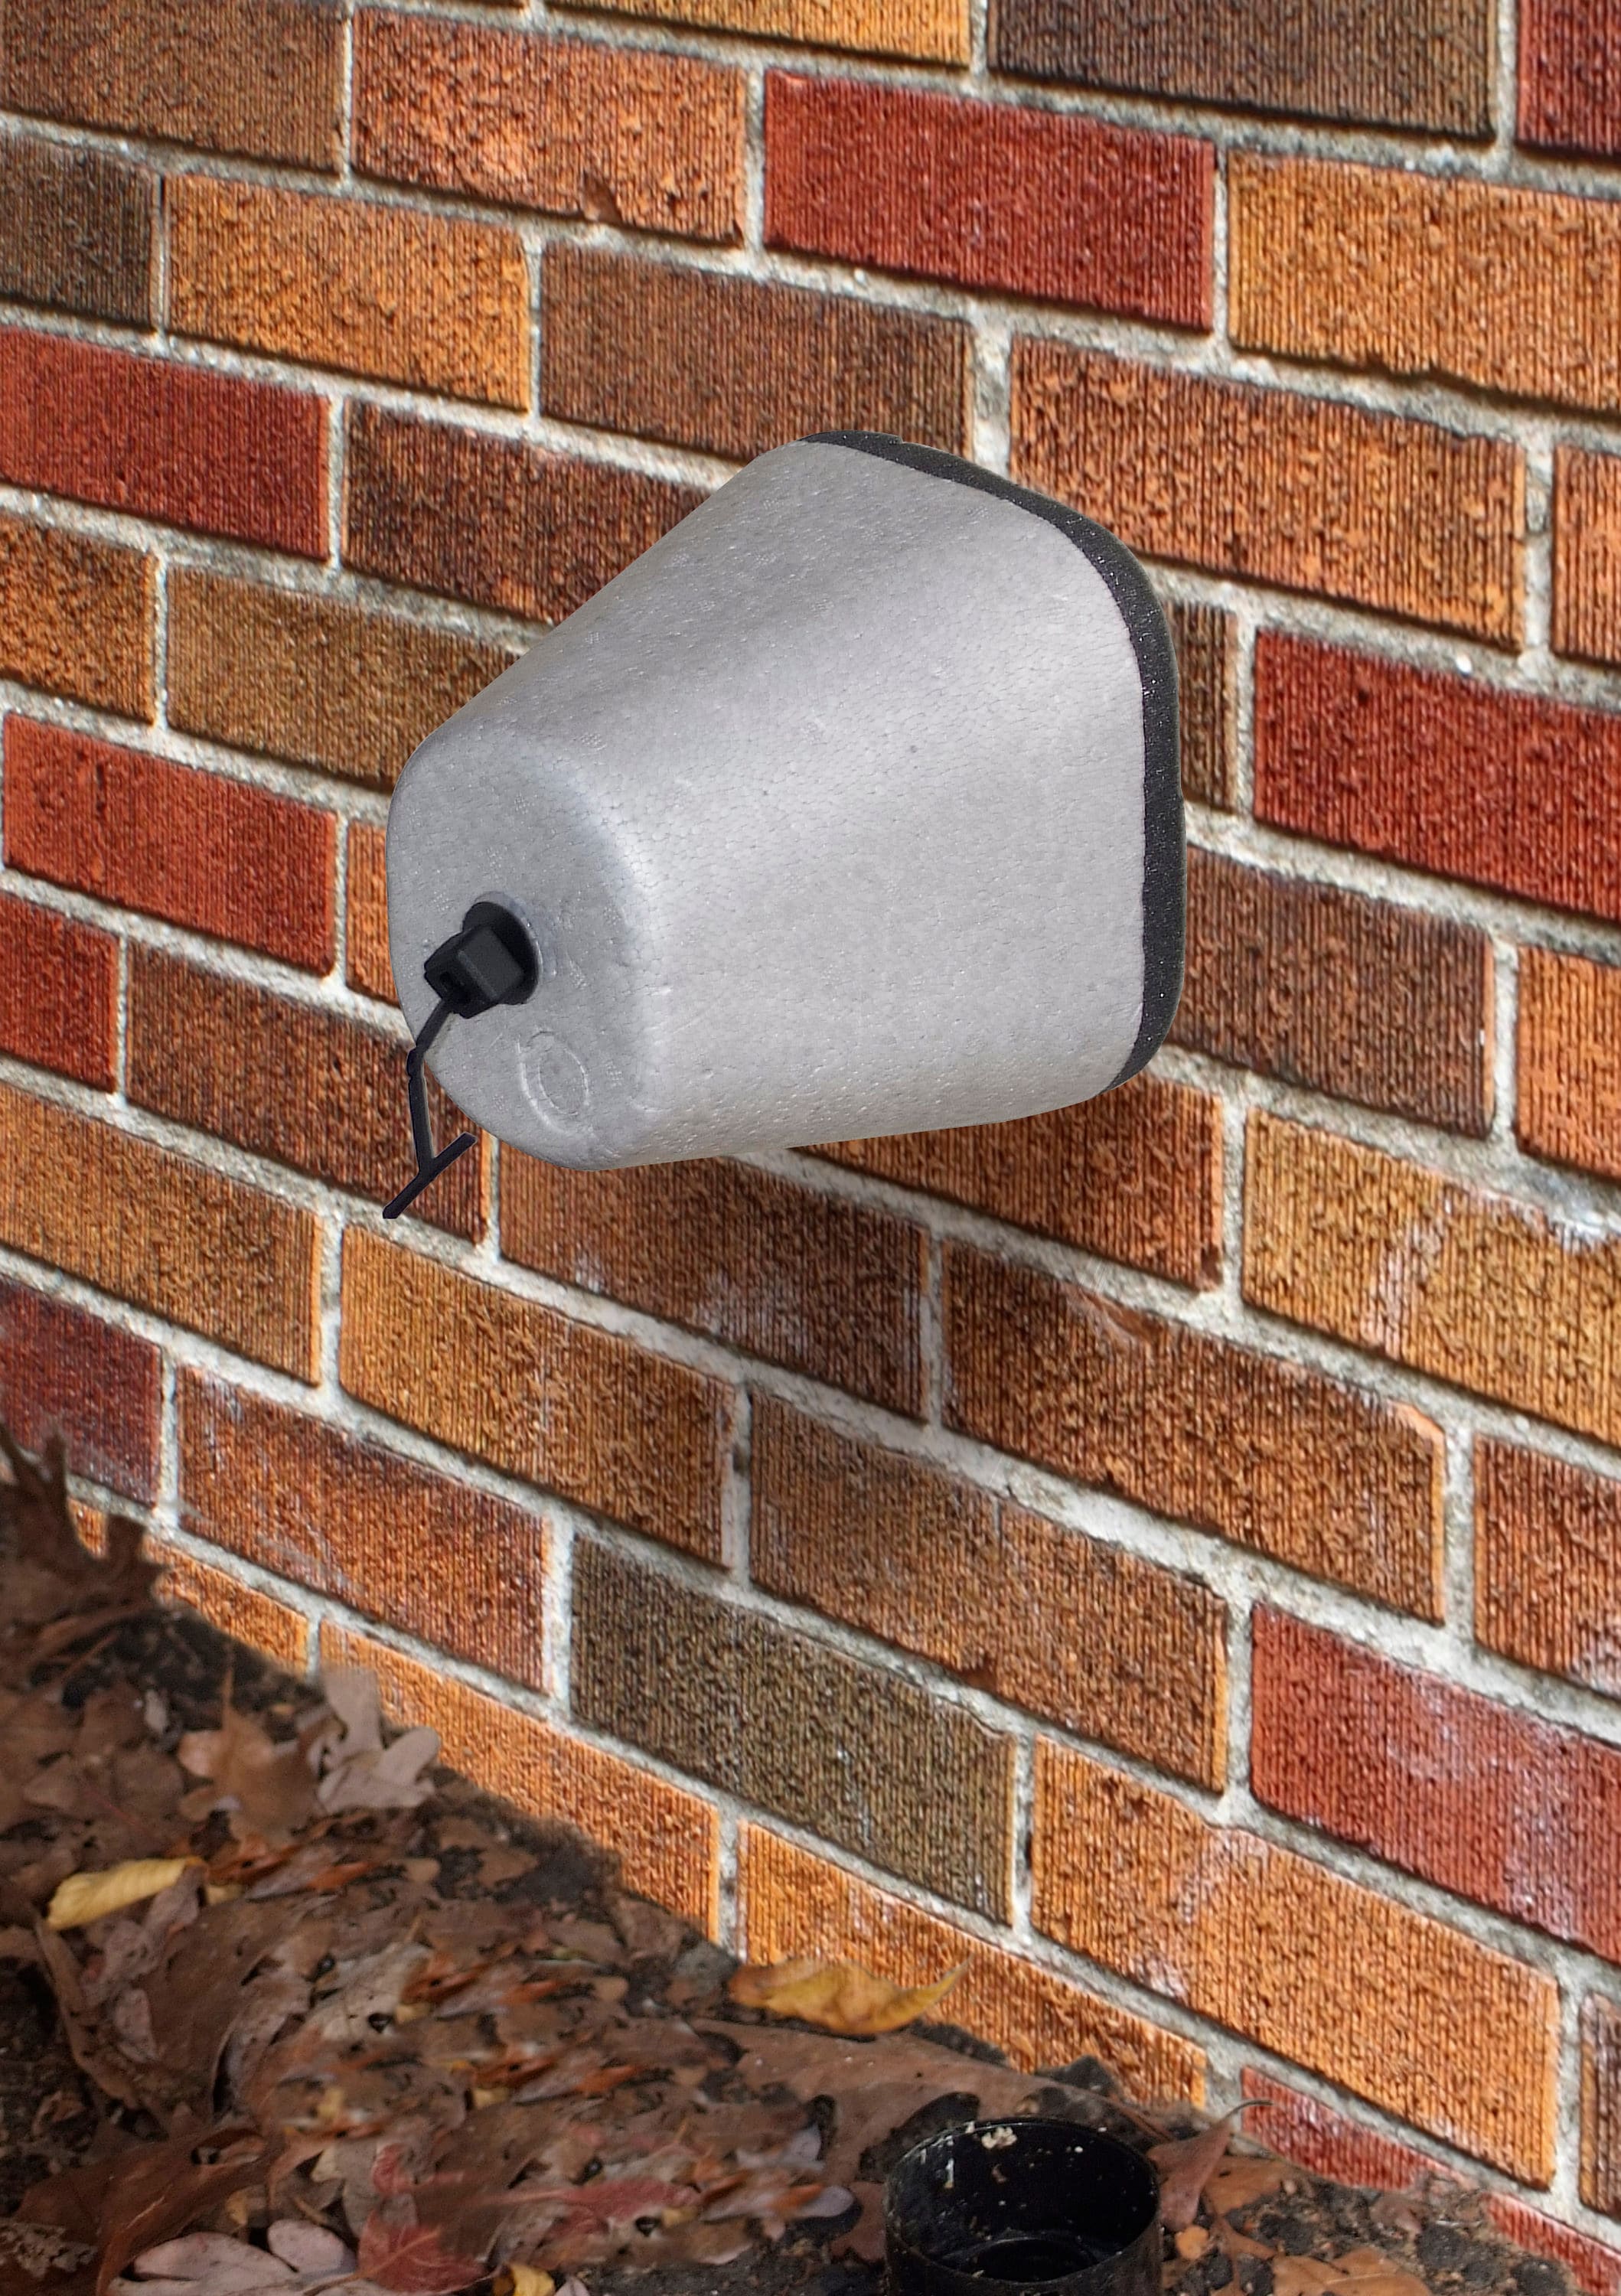 Frost King Polystyrene Foam Outdoor Faucet Cover at Tractor Supply Co.